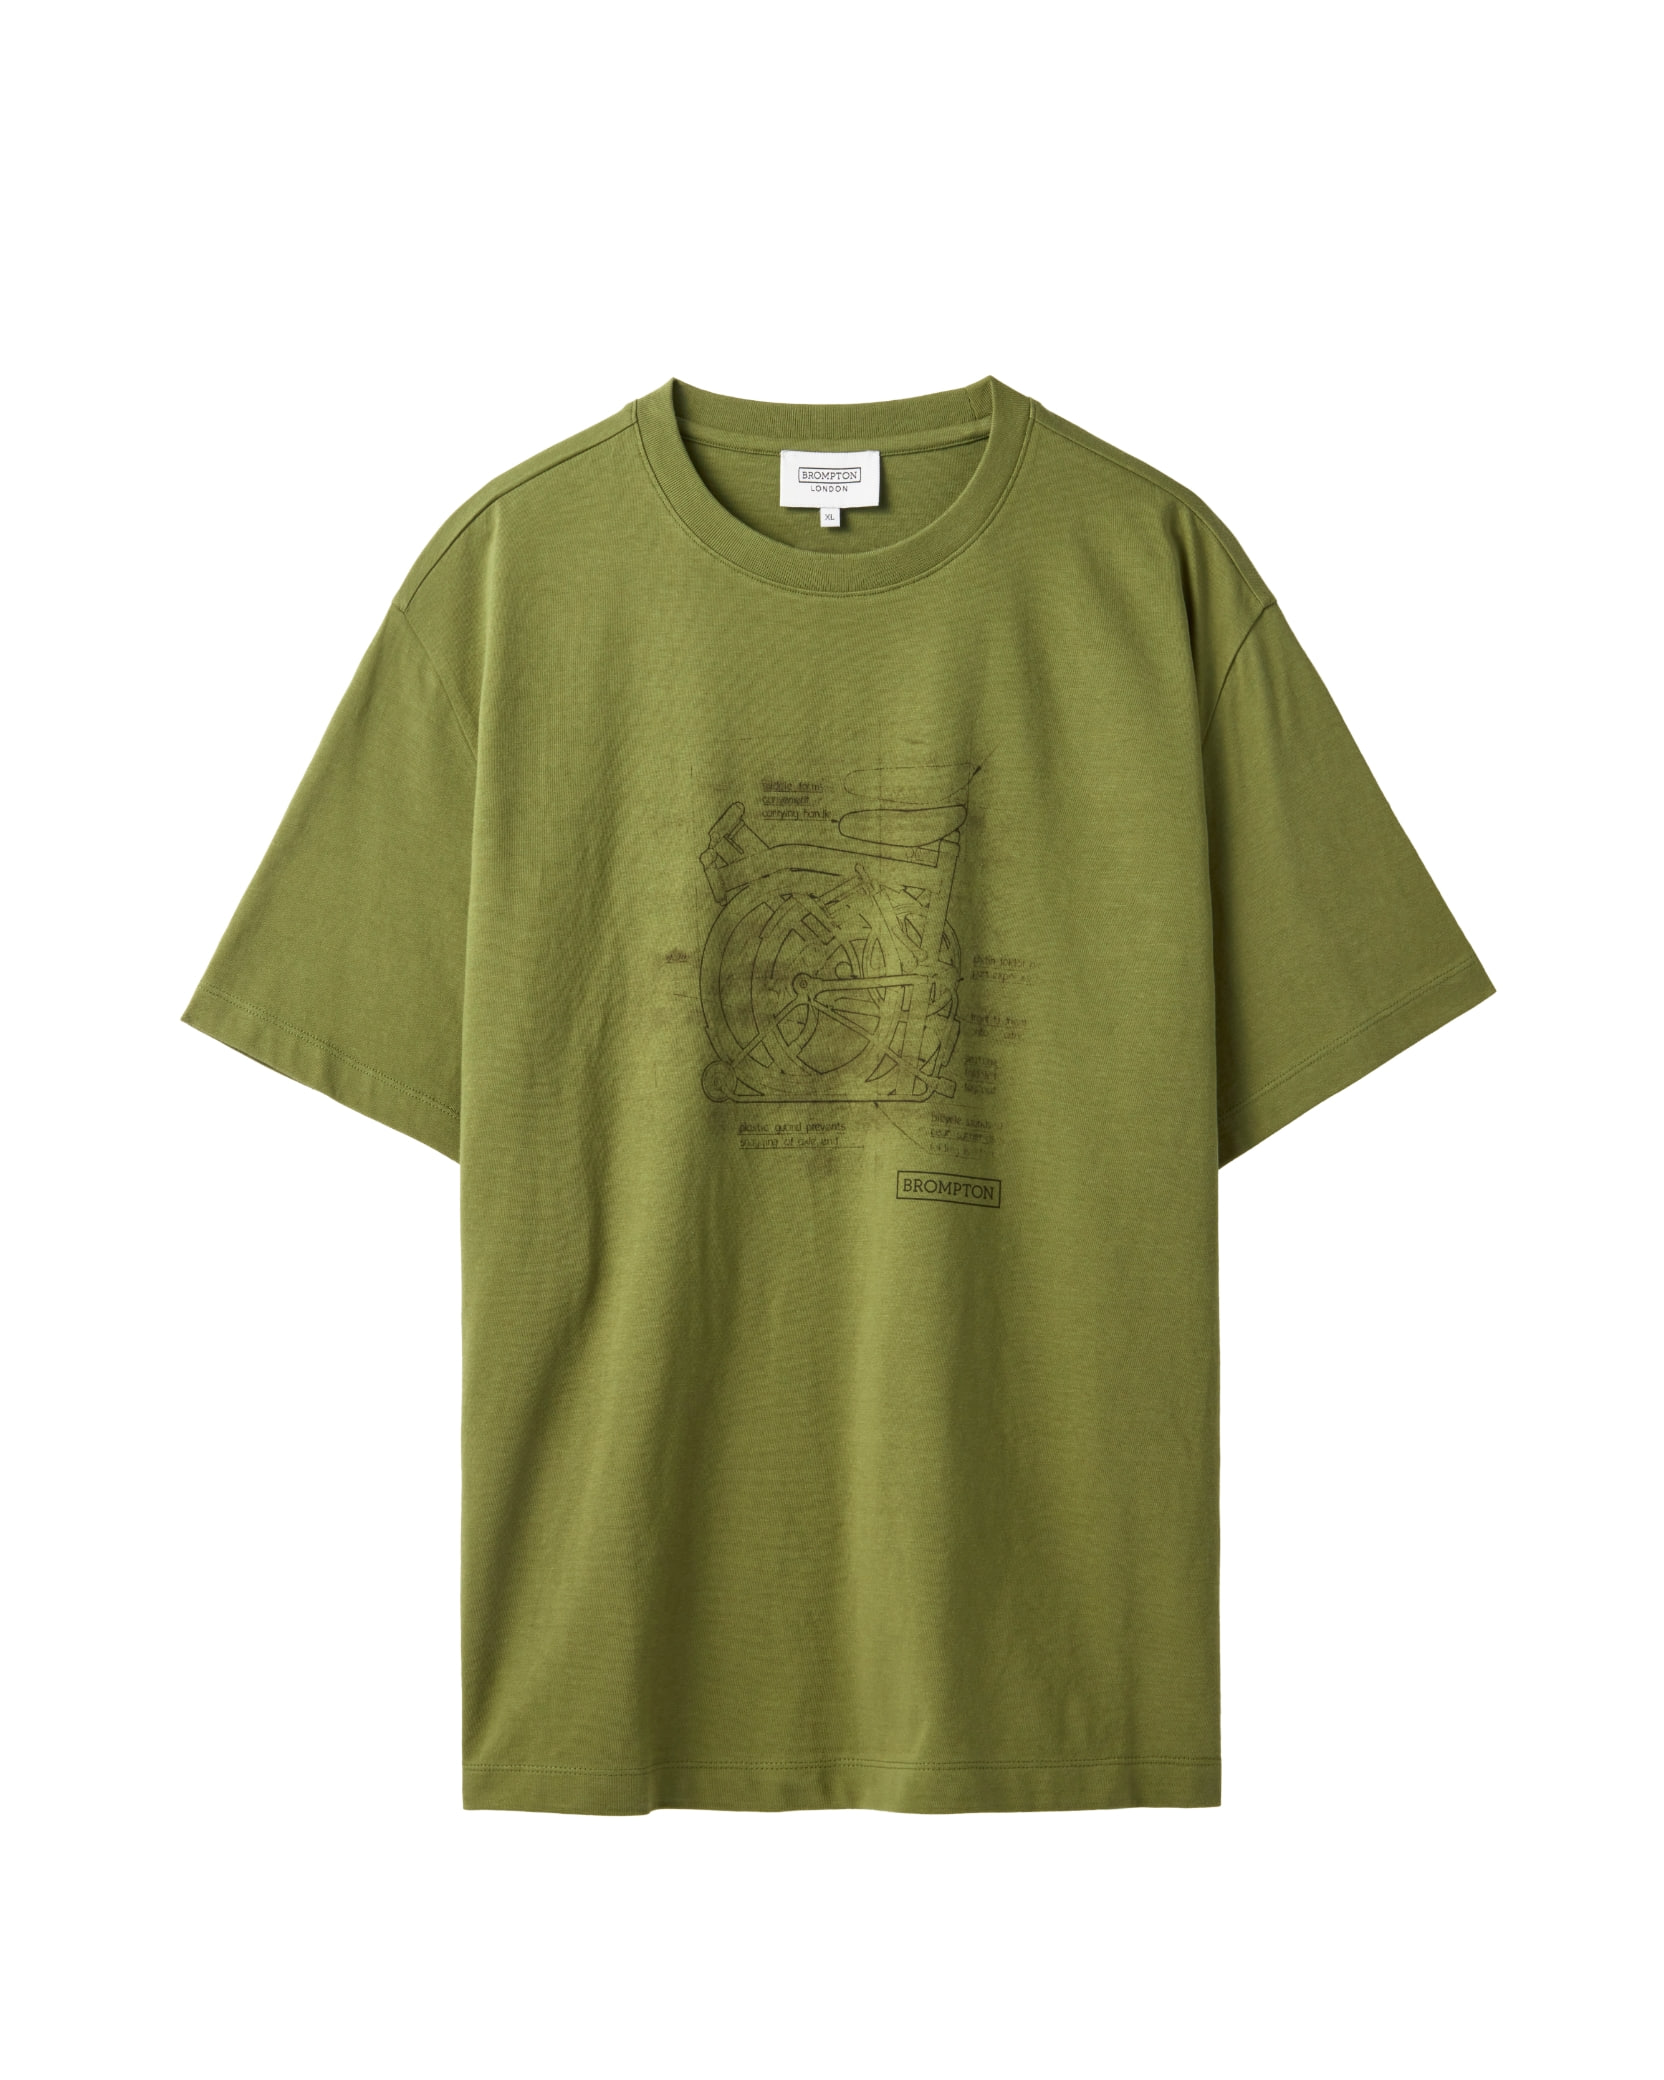 1975 FRONT BICYCLE PRINT T-SHIRT - GREEN